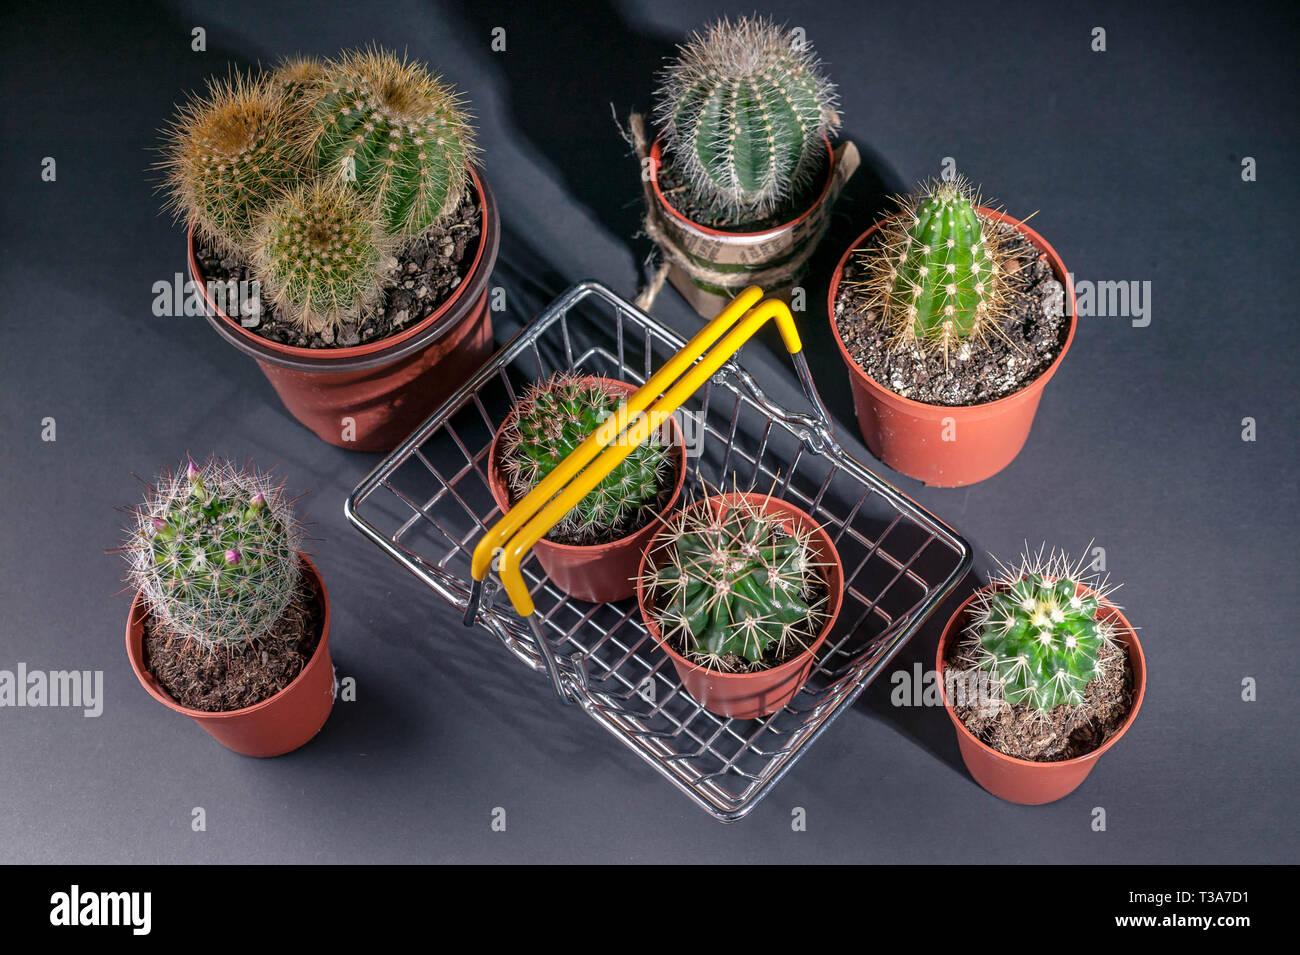 Cacti collection on dark background. Low key lighting Stock Photo